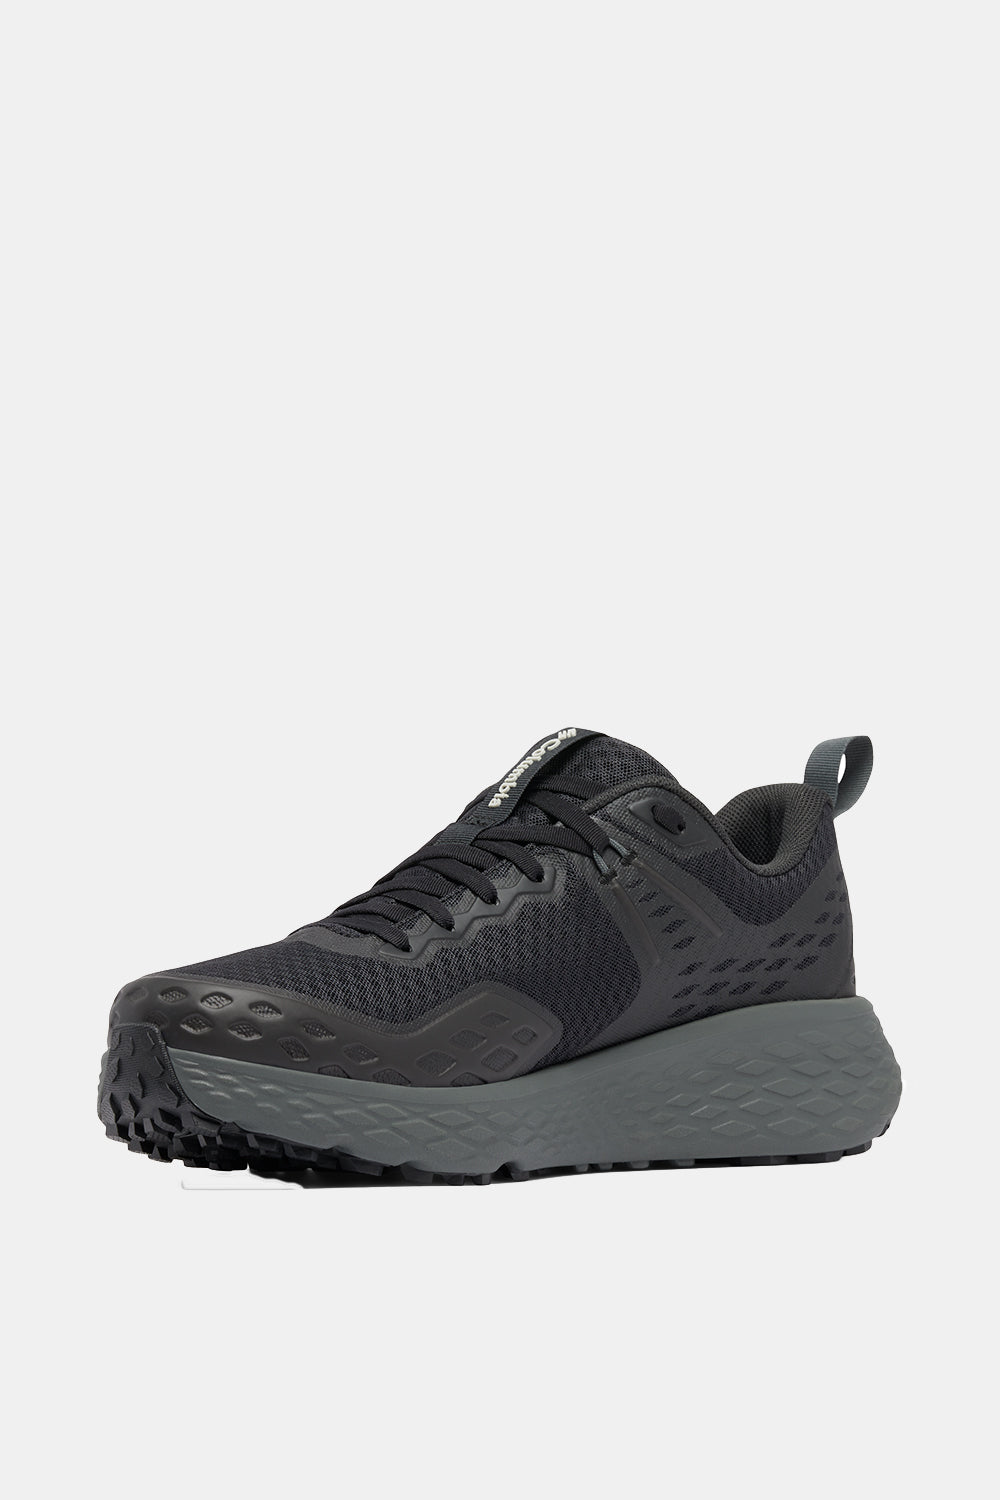 Columbia Konos TRS Outdry Trainers (Black/Grill)
